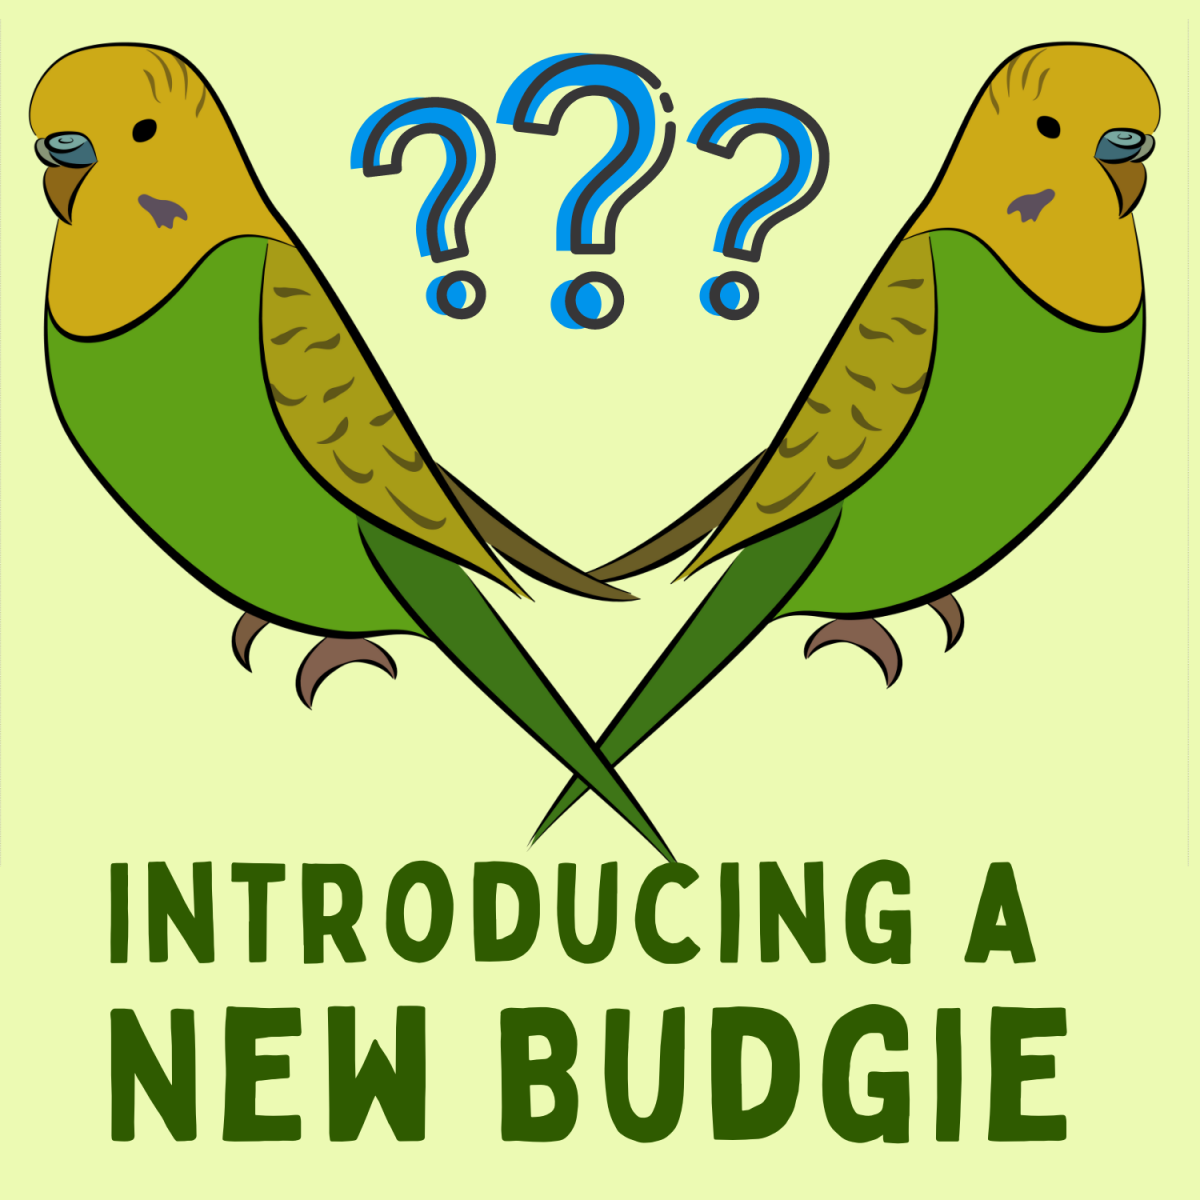 How to Introduce a Second Budgie